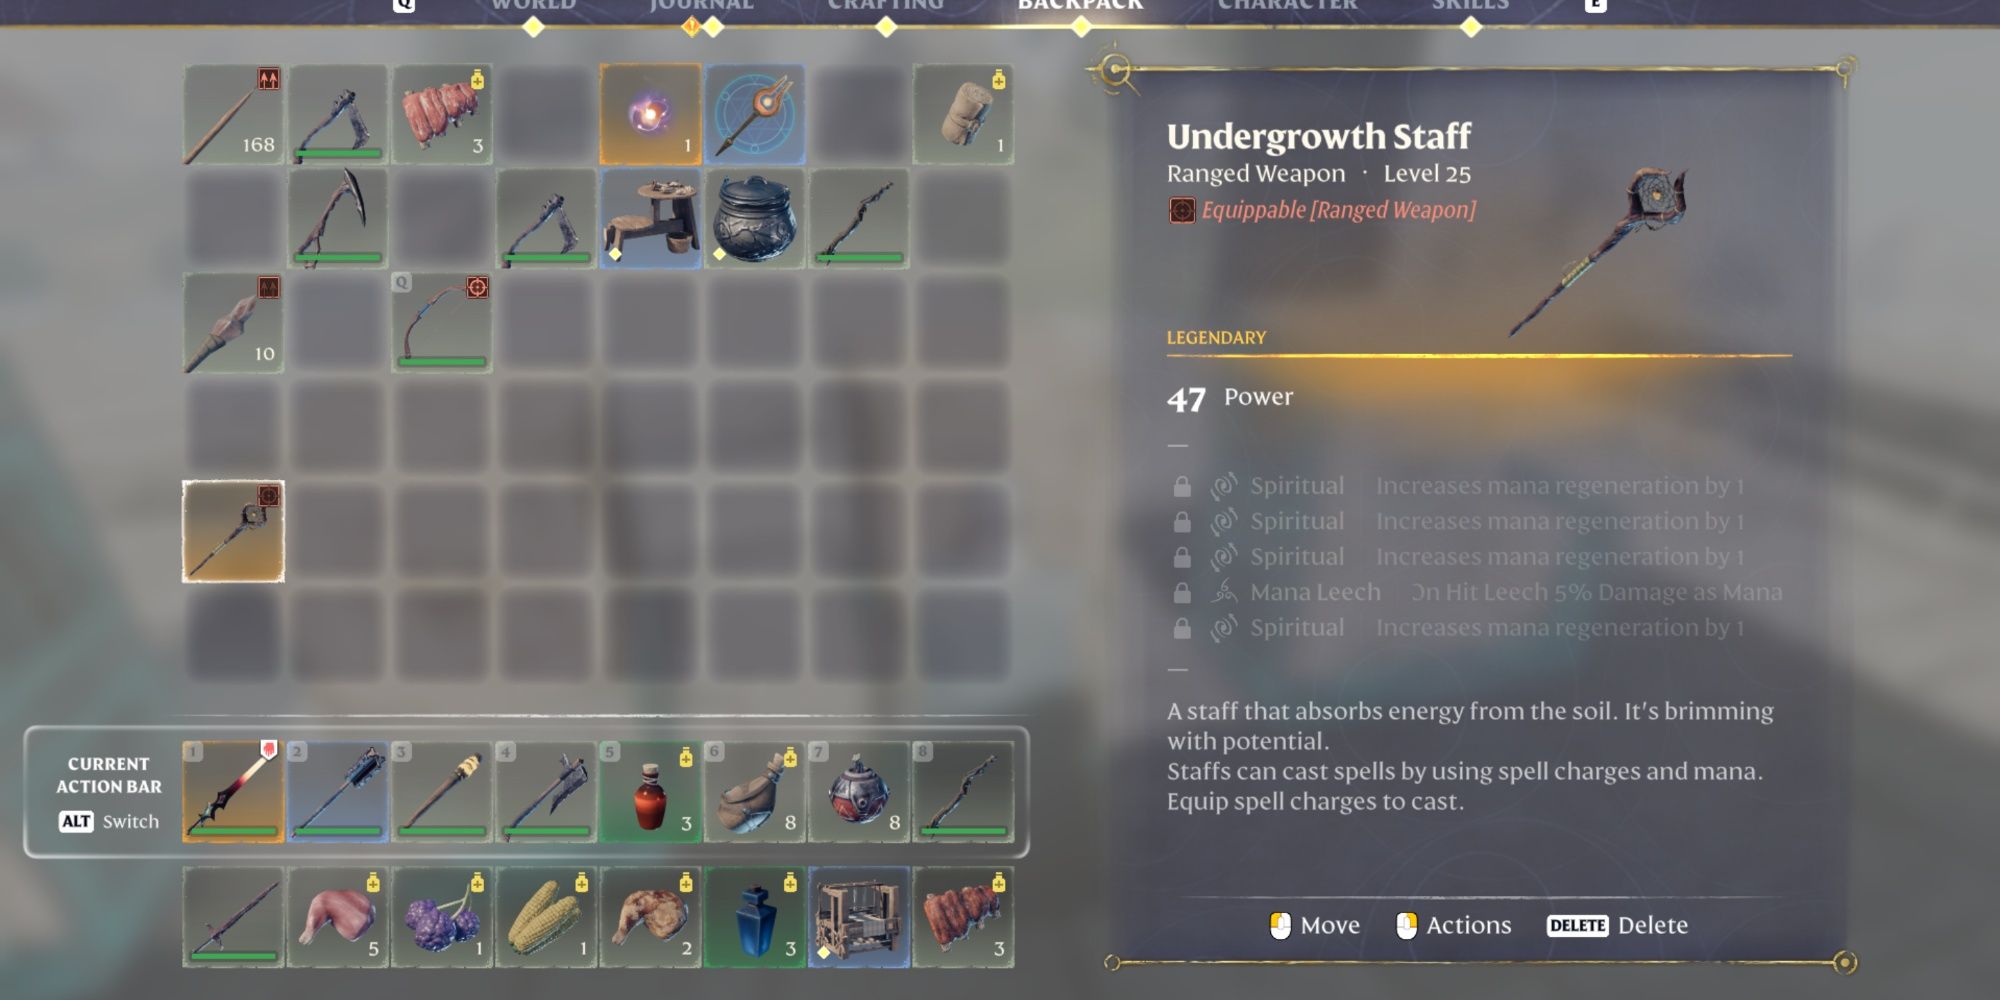 Undergrowth Staff Weapons, Ranked